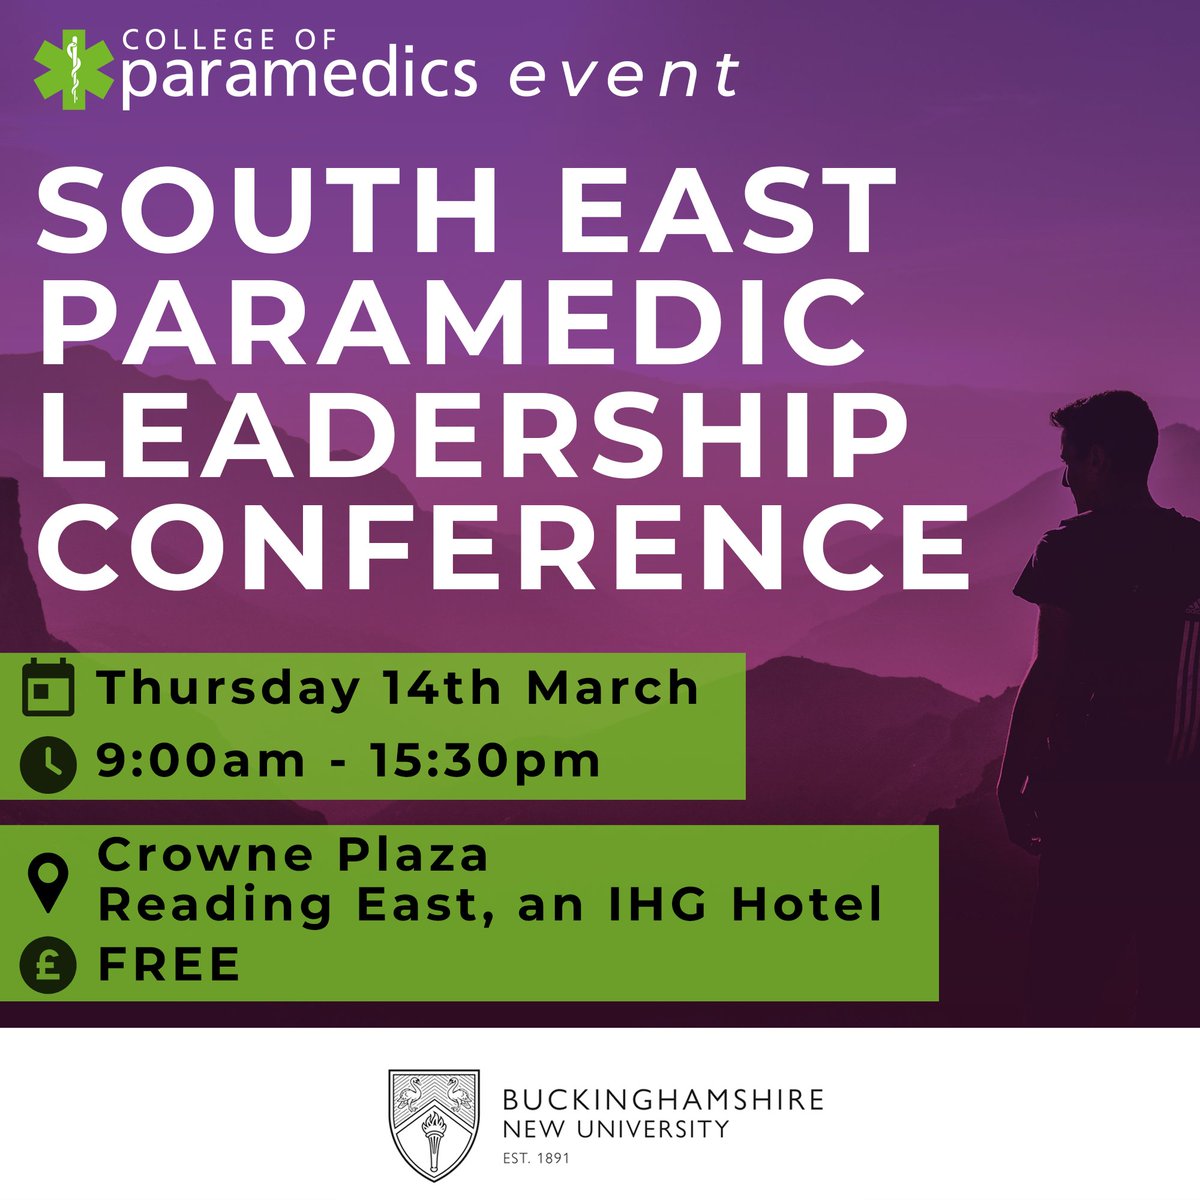 A gathering of aspiring and established paramedic leaders across the South East - aiming to improve paramedic leadership across the region - and it's free! College of Paramedics, Chief Executive - Tracy Nicholls will also be in attendance 💚 👉bit.ly/49DxBHC